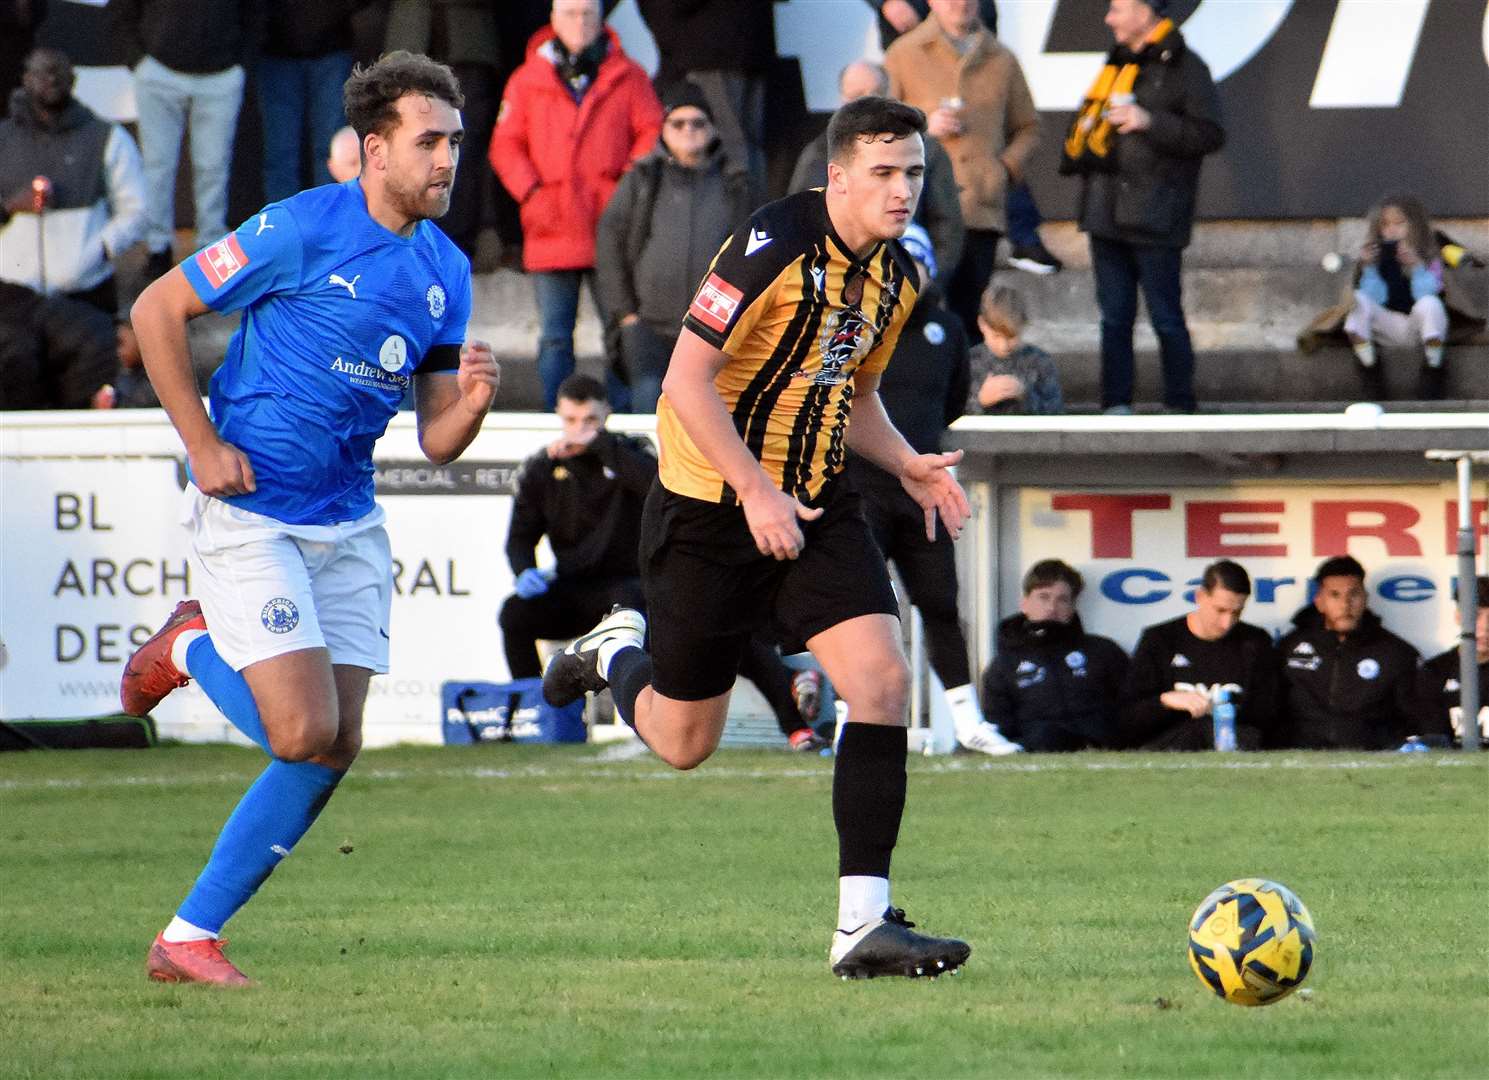 Folkestone and Billericay in a sprint for the ball Picture: Randolph File